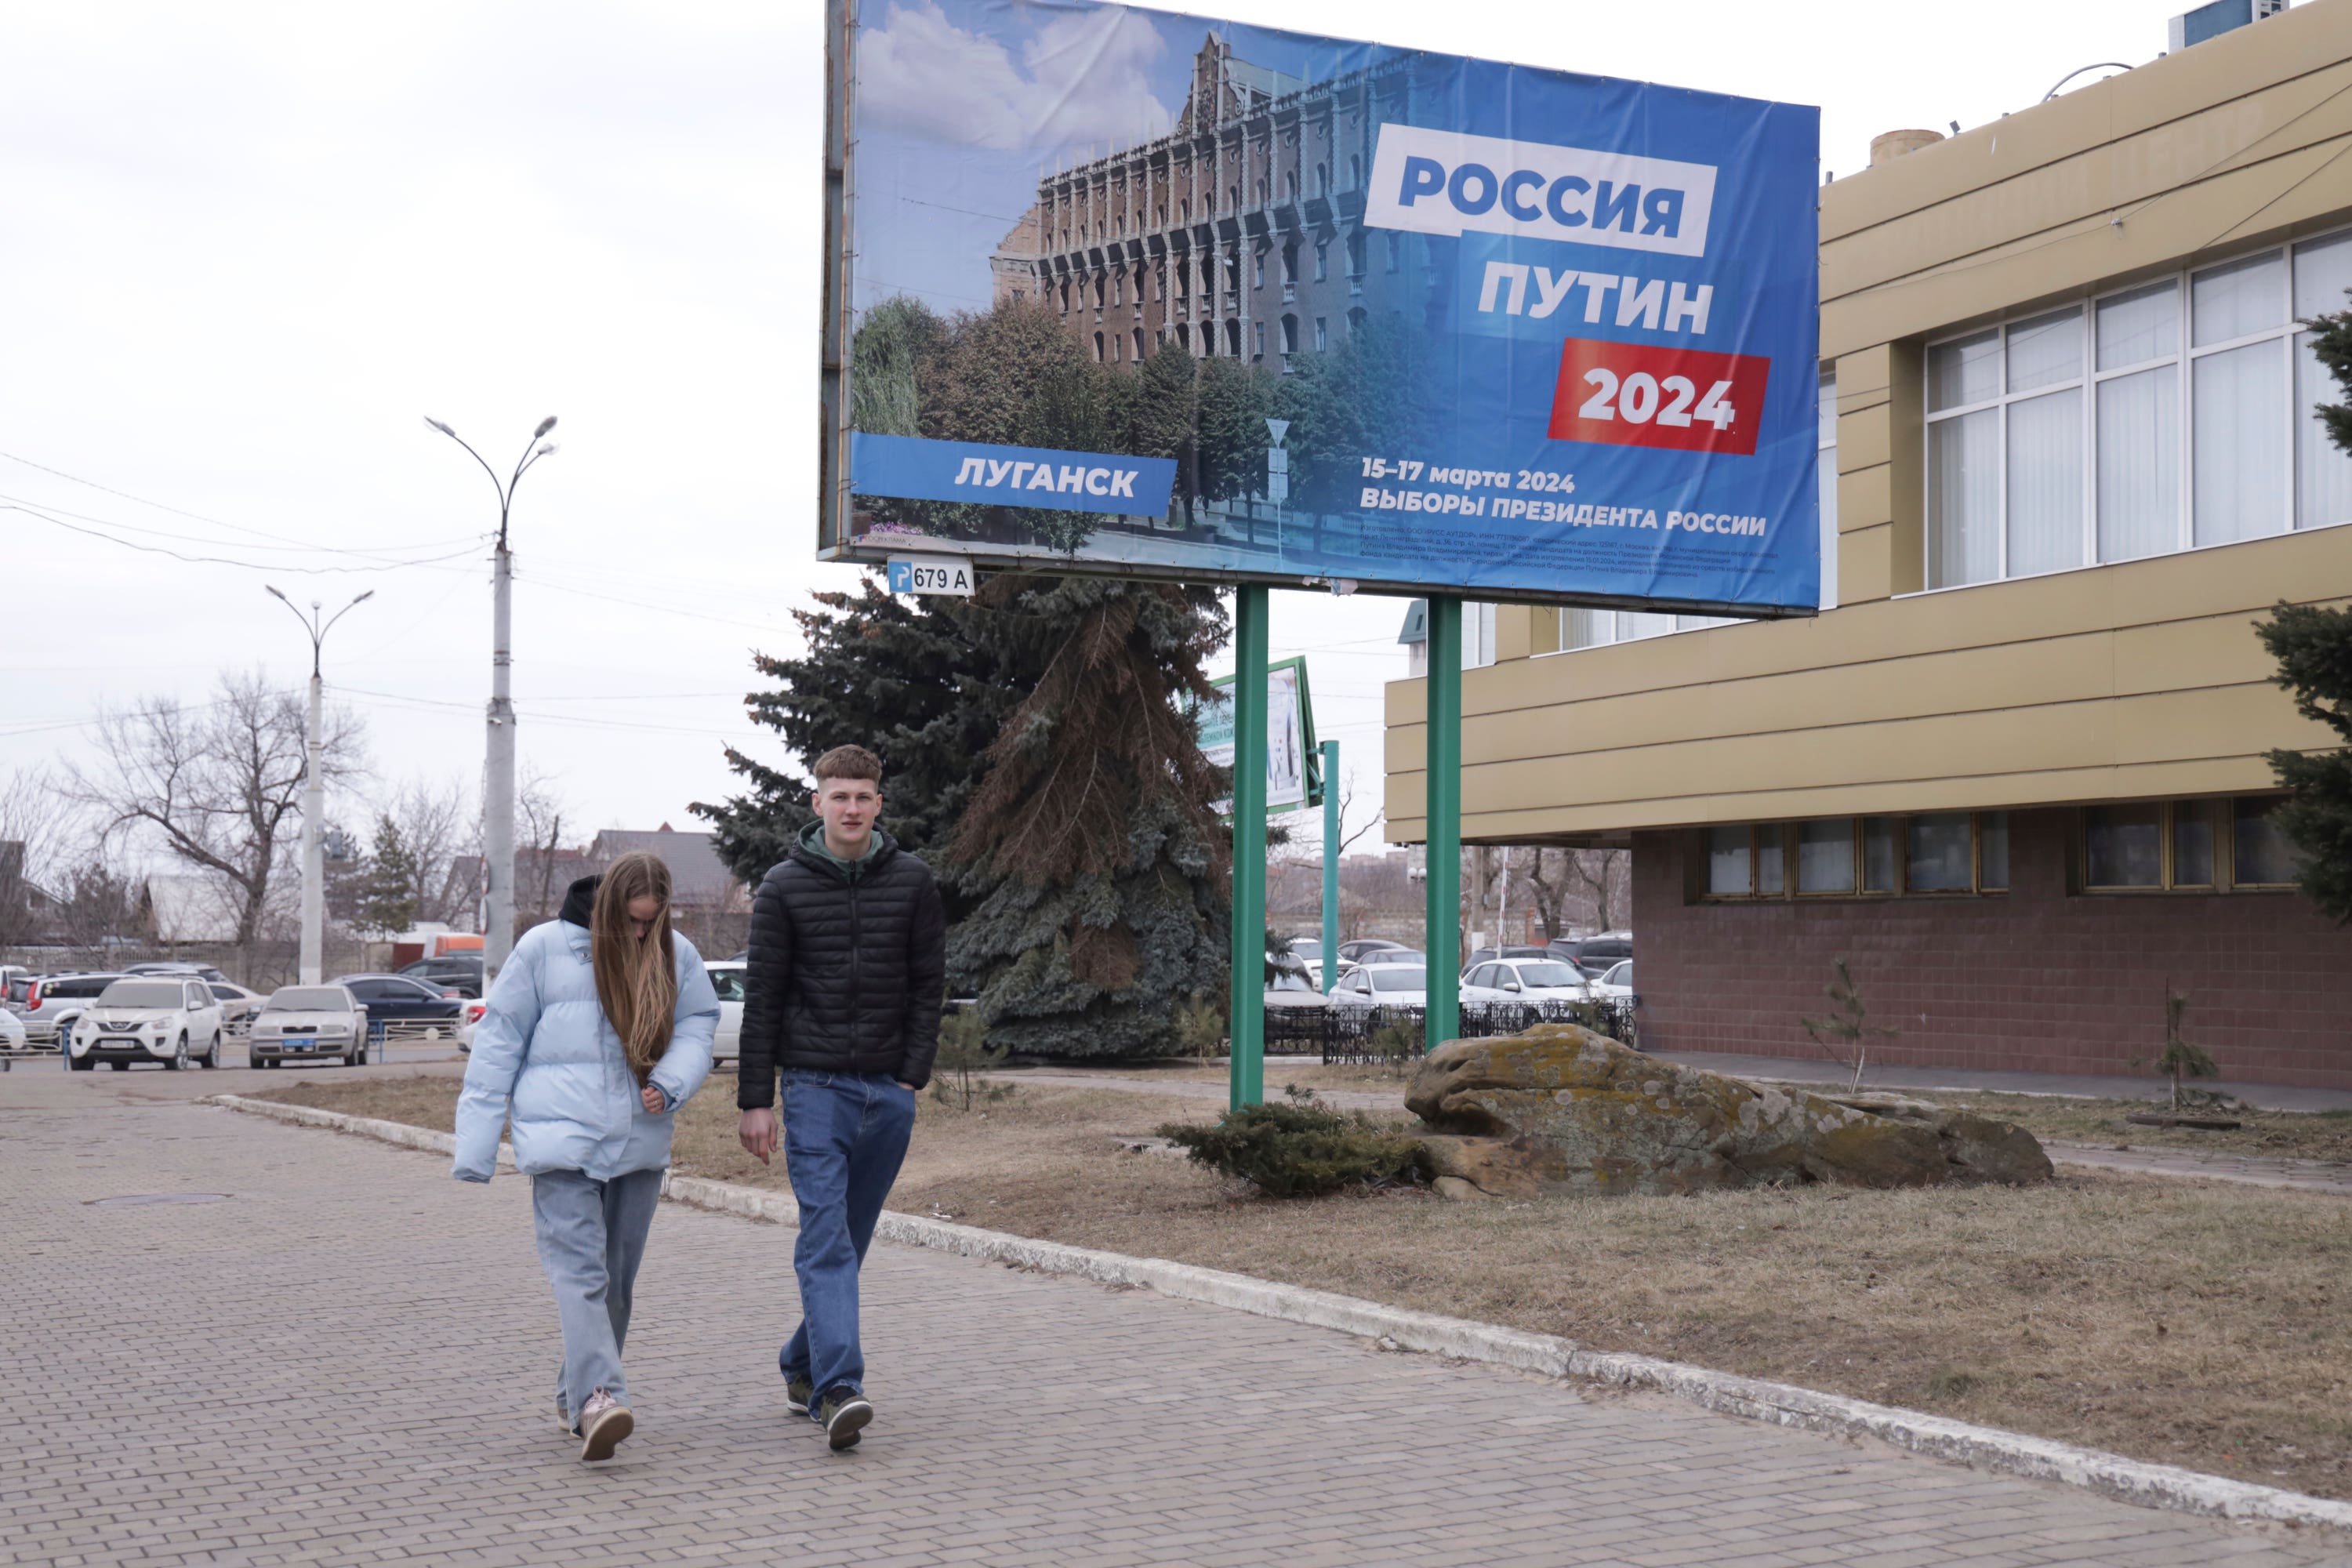 Billboards promoting the upcoming presidential election have been put up in Luhansk, the capital of the Russian-controlled Luhansk region in eastern Ukraine.